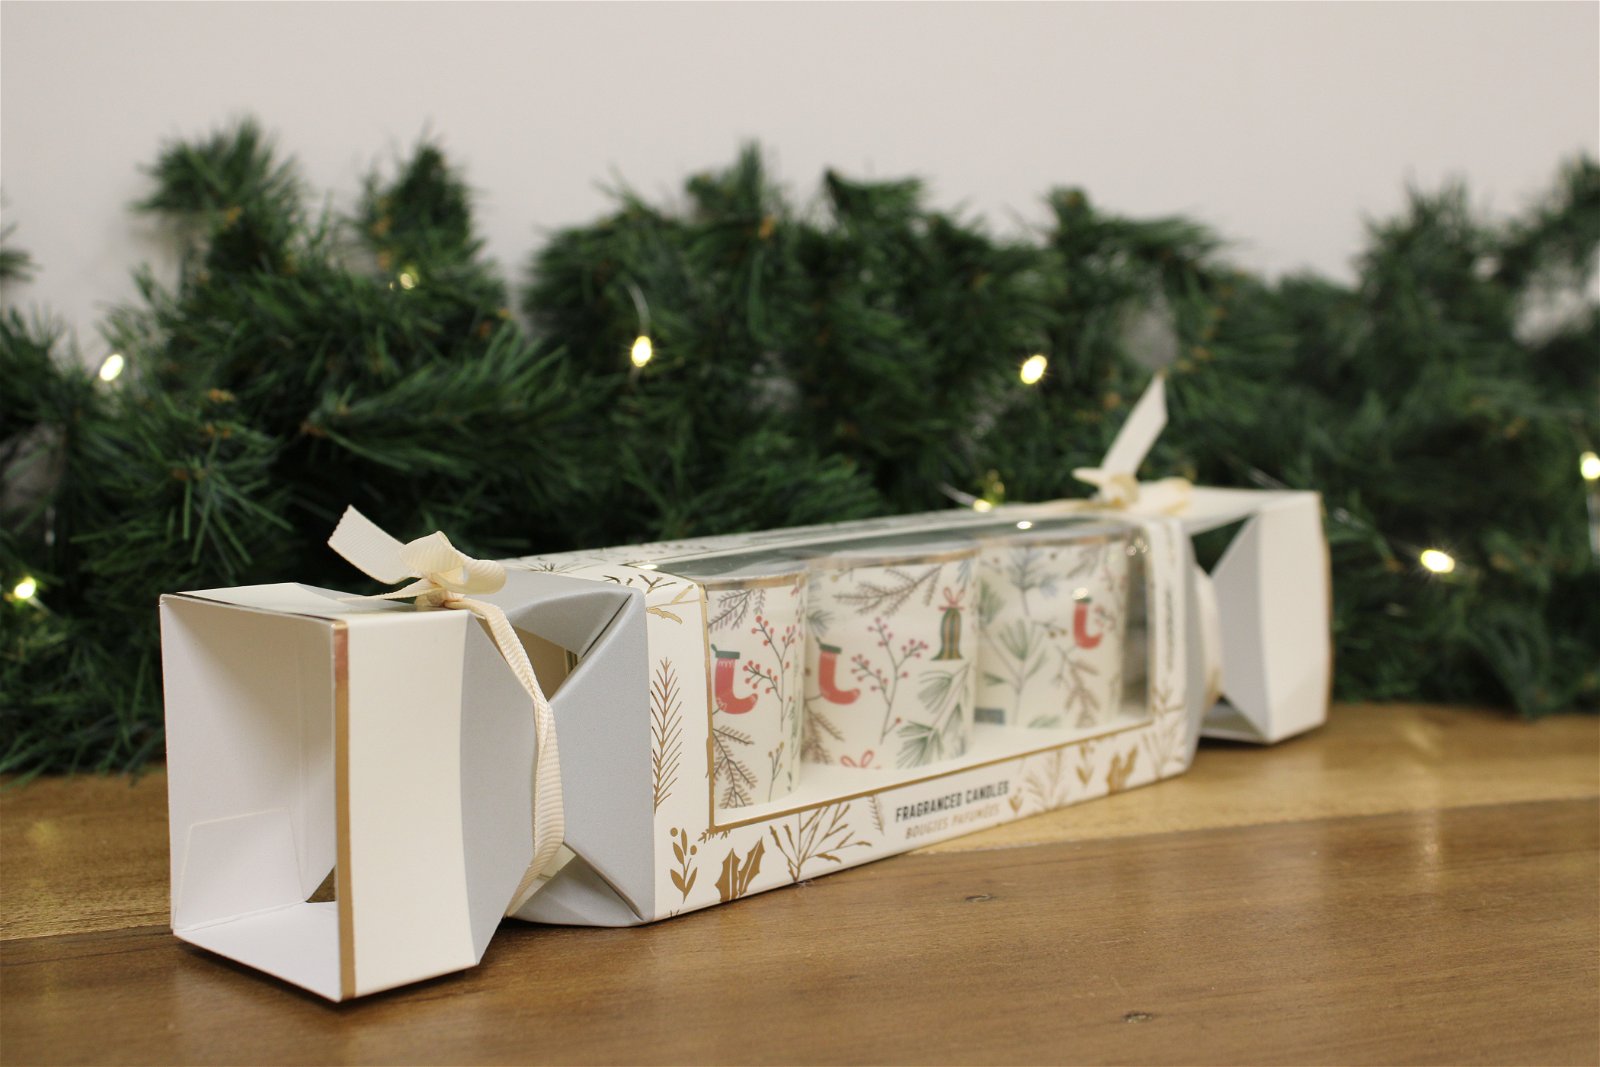 Cracker Gift-box with Vanilla Spice Candle-pots - a Cheeky Plant